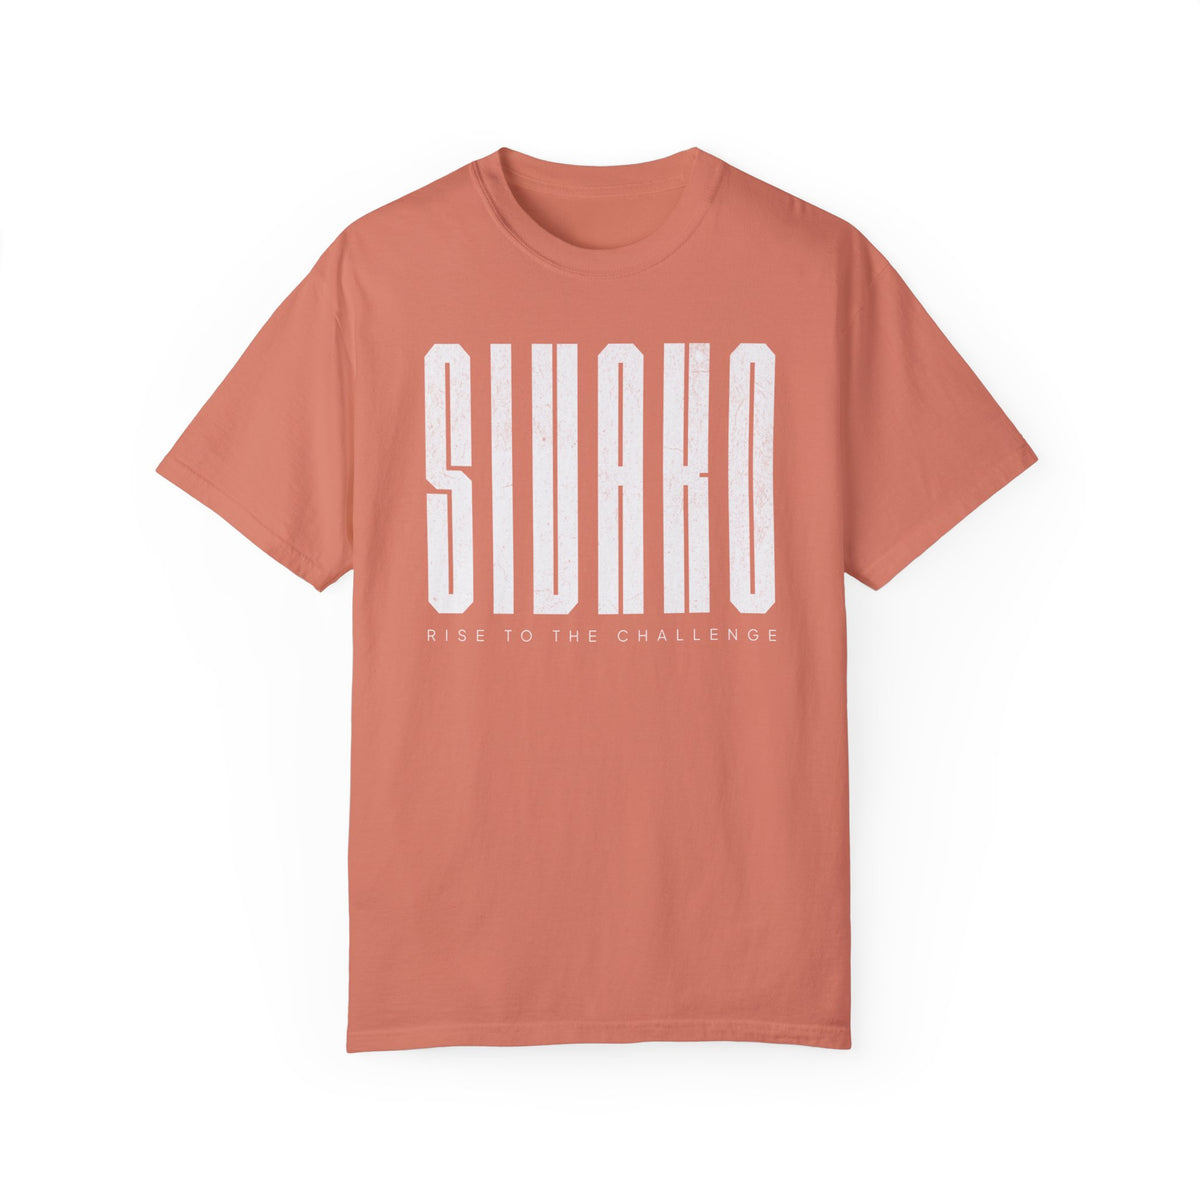 Sivako Rise To The Challenge Comfort Colors Unisex Garment-Dyed T-shirt